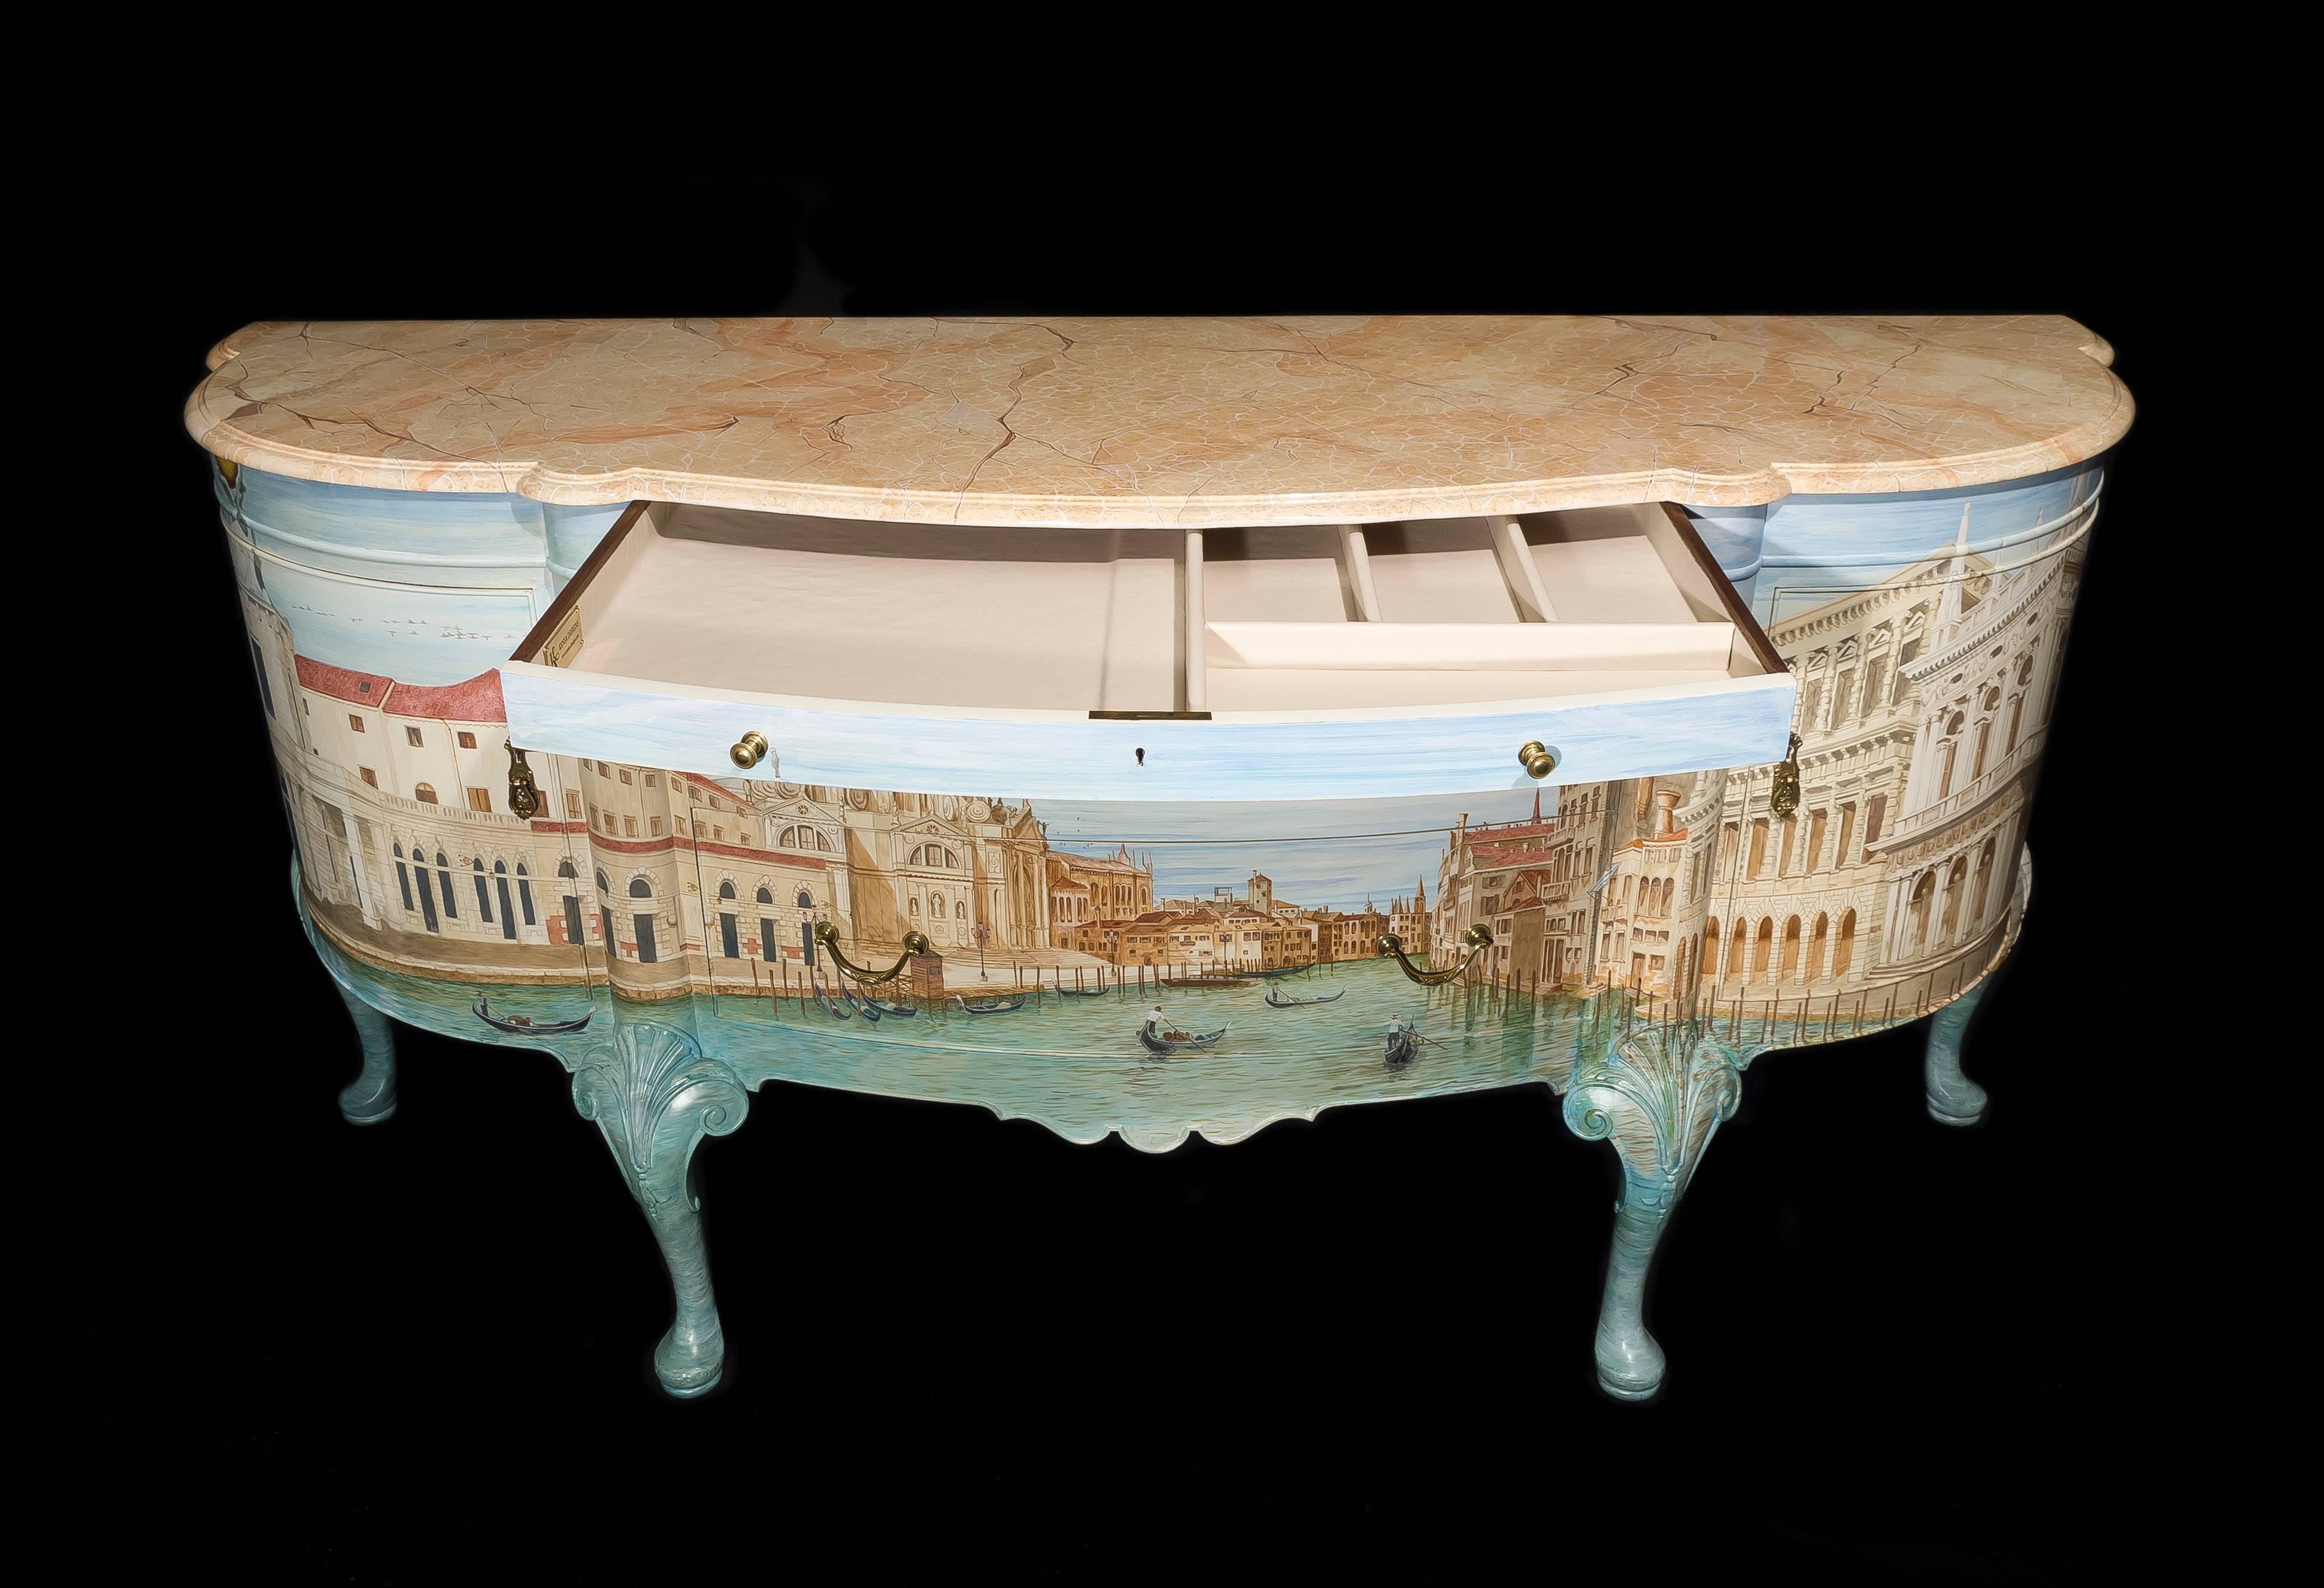 1932 Waring and Gillow British Sideboard Hand-Painted by Kensa Design For Sale 2